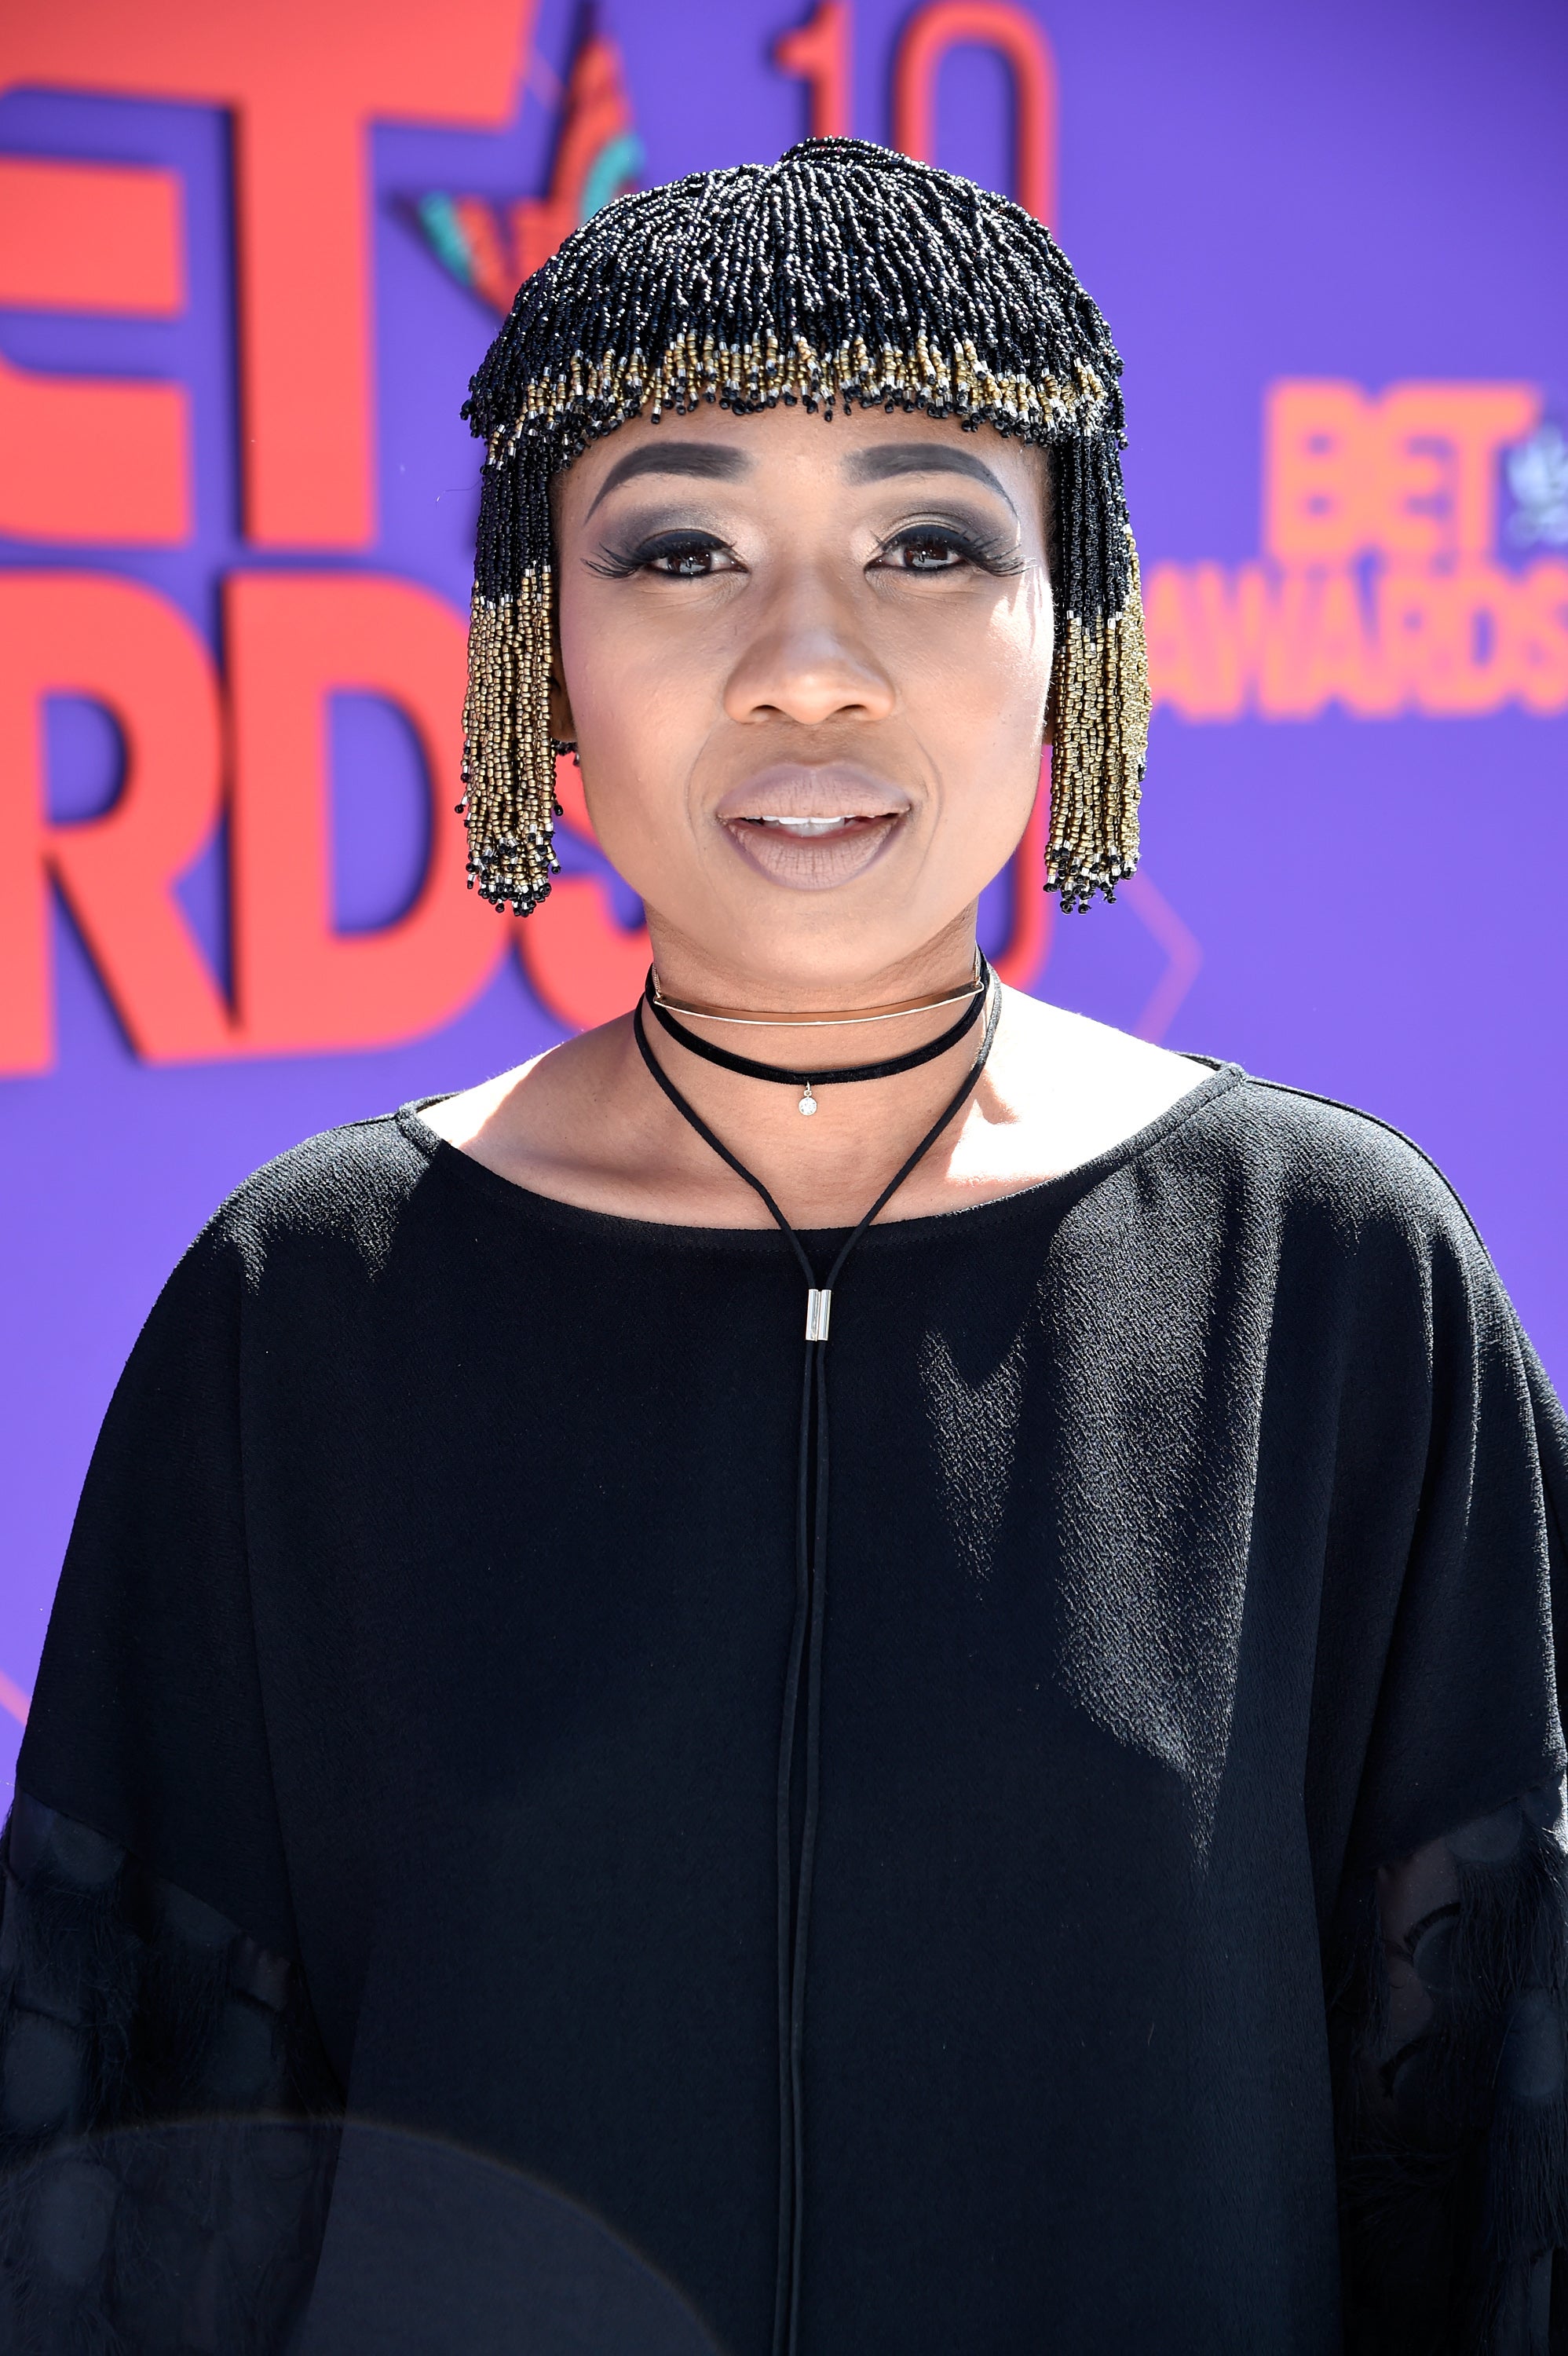 The Natural Hairstyles We Loved At the 2018 BET Awards
